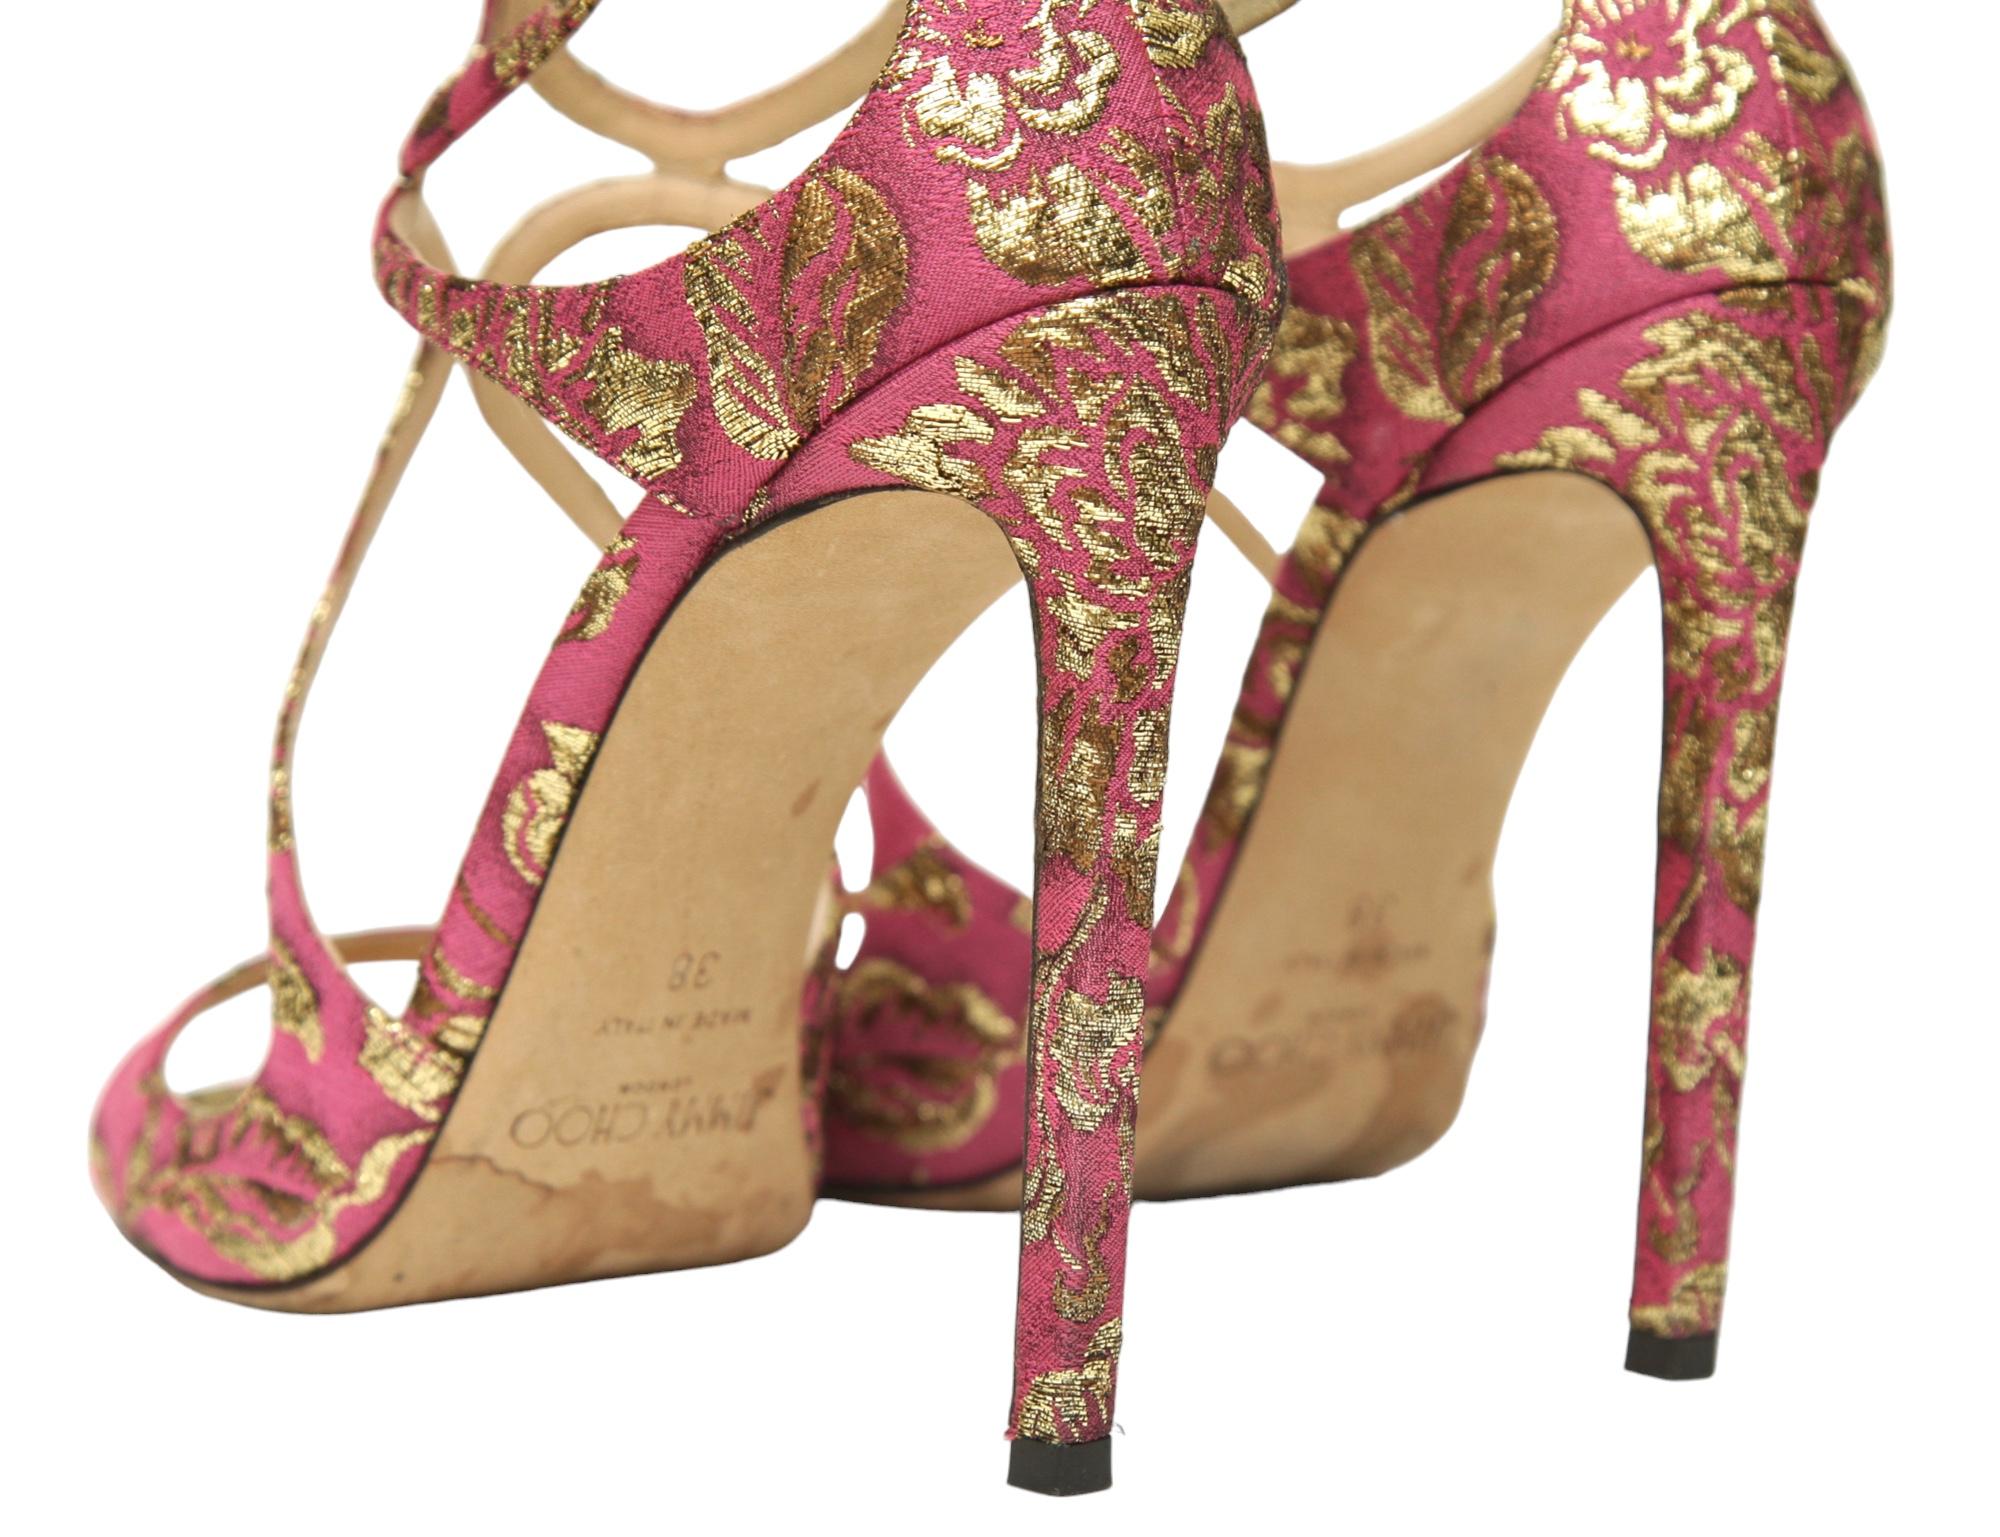 JIMMY CHOO Sandals Brocade Pink Gold Metallic LANCER Heels Leather Strappy 38 For Sale 2